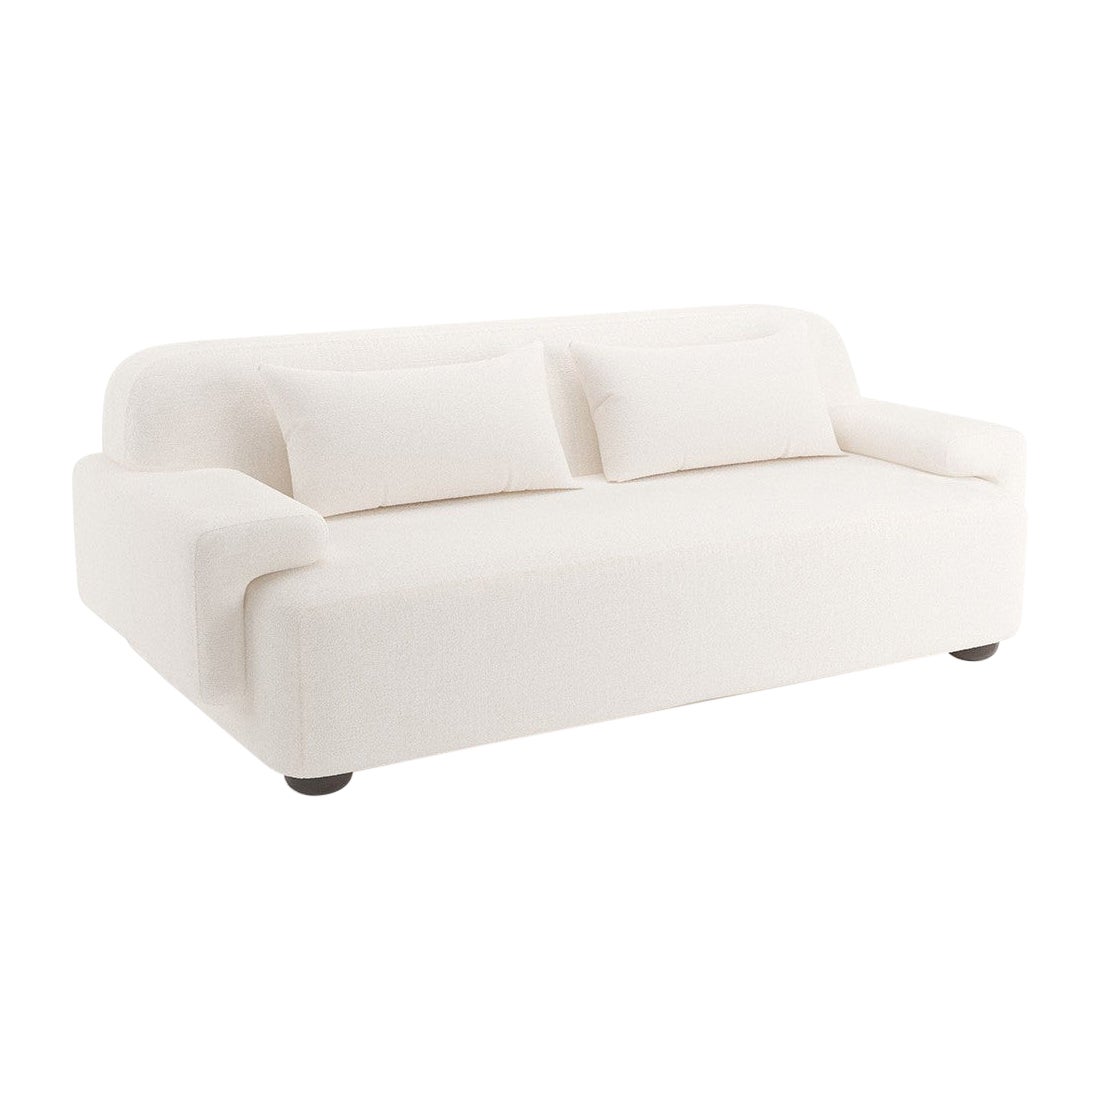 Popus Editions Lena 3 Seater Sofa in Egg Shell Off-White Malmoe Terry Fabric